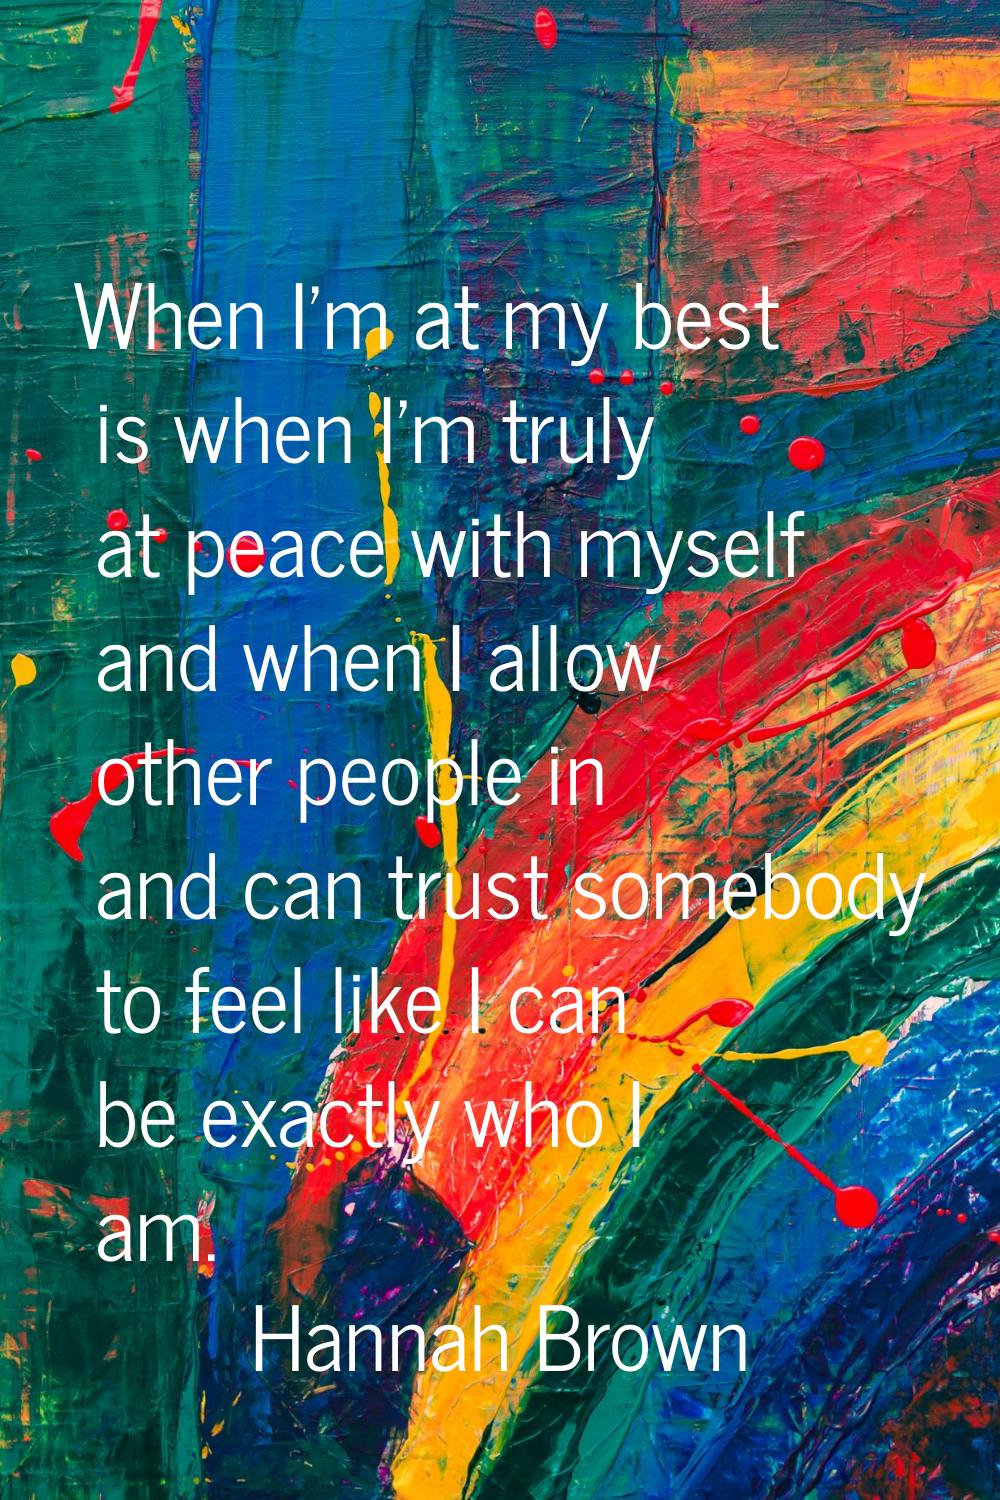 When I'm at my best is when I'm truly at peace with myself and when I allow other people in and can